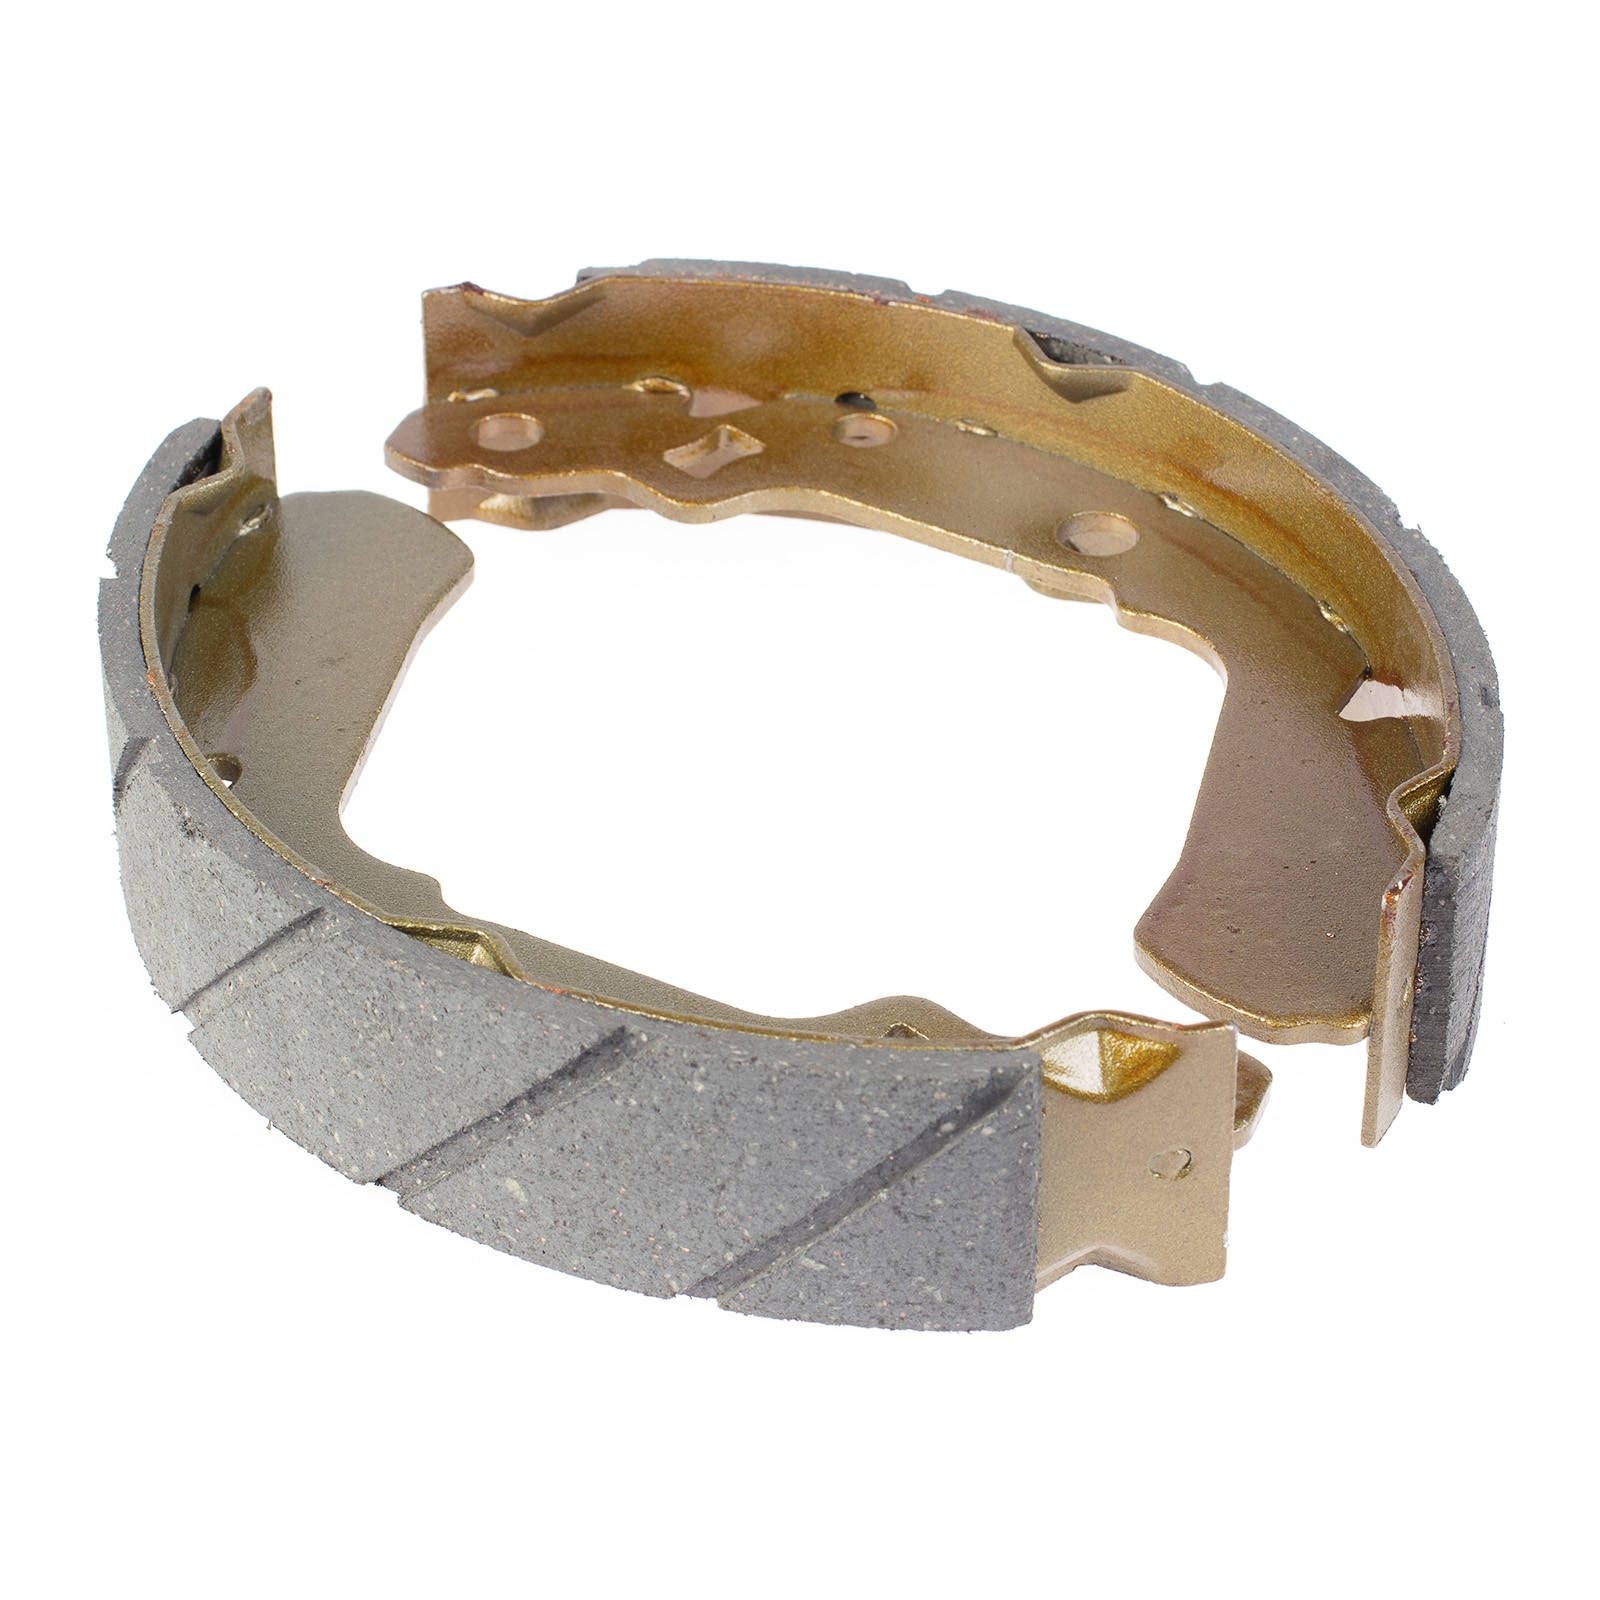 New WHITES Motorcycle Brake Shoes - Water Groove #WPBS41072